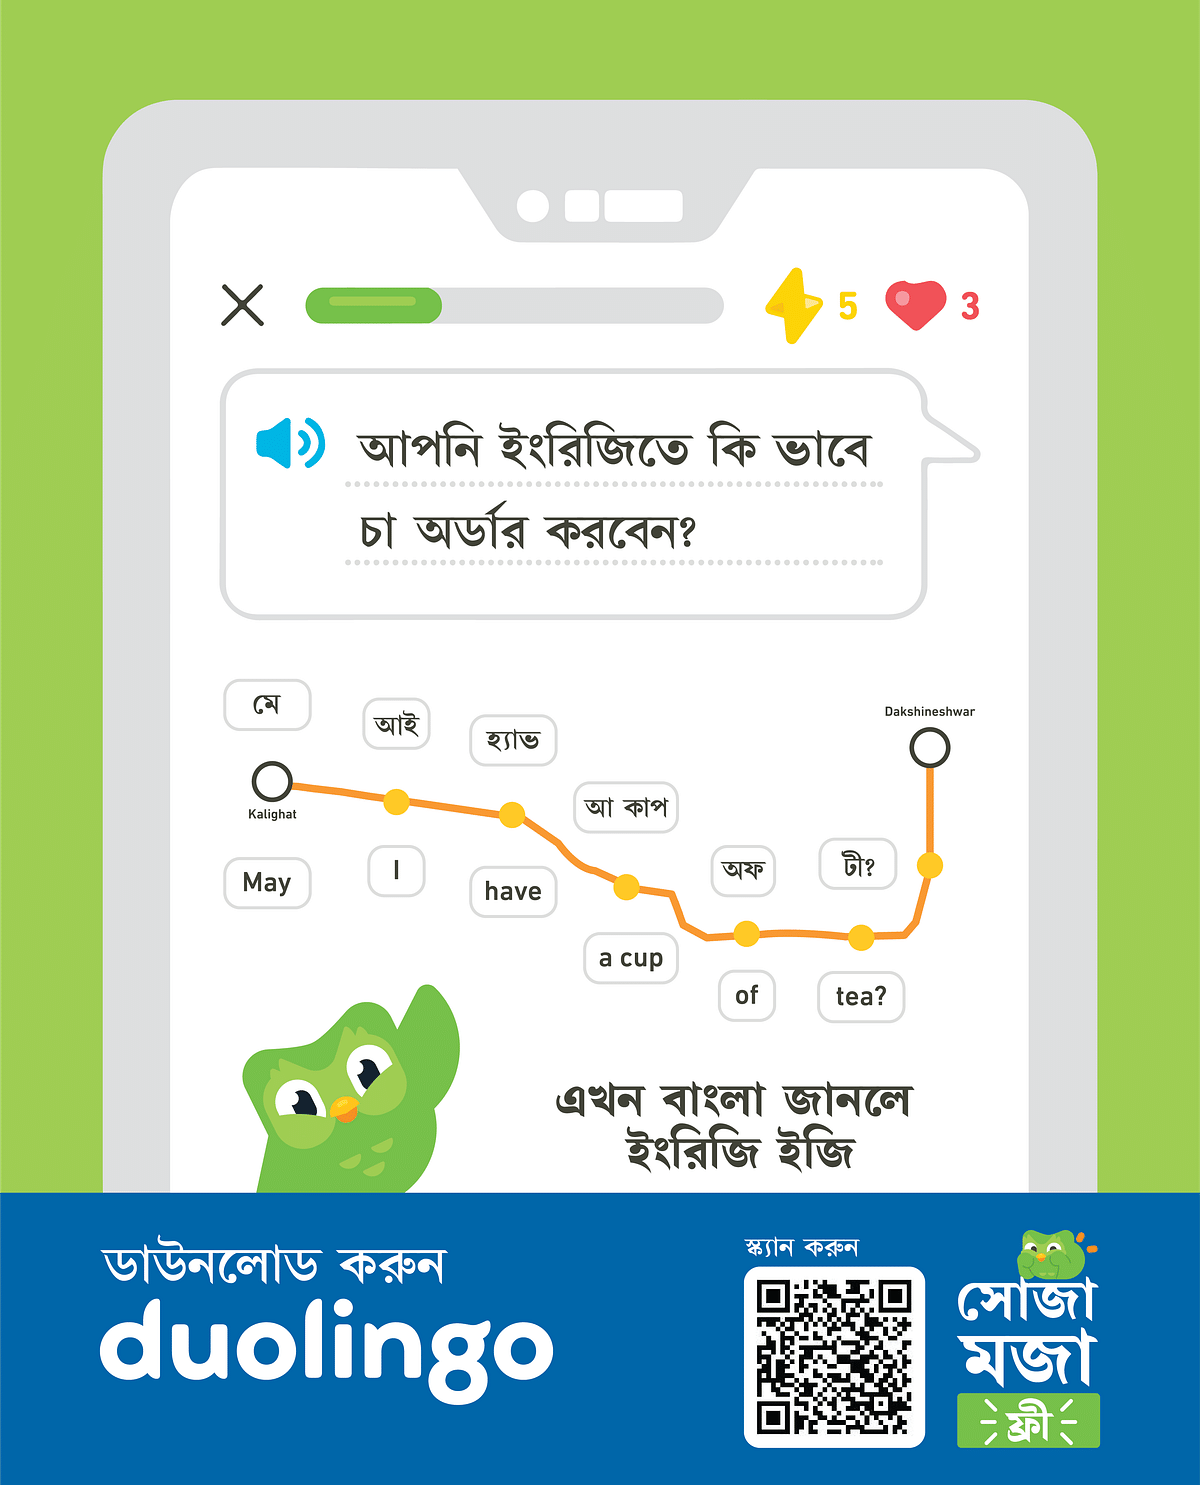 Duolingo’s hyper-localized language launch campaign propels the Bengali to English course to #2 position in India 